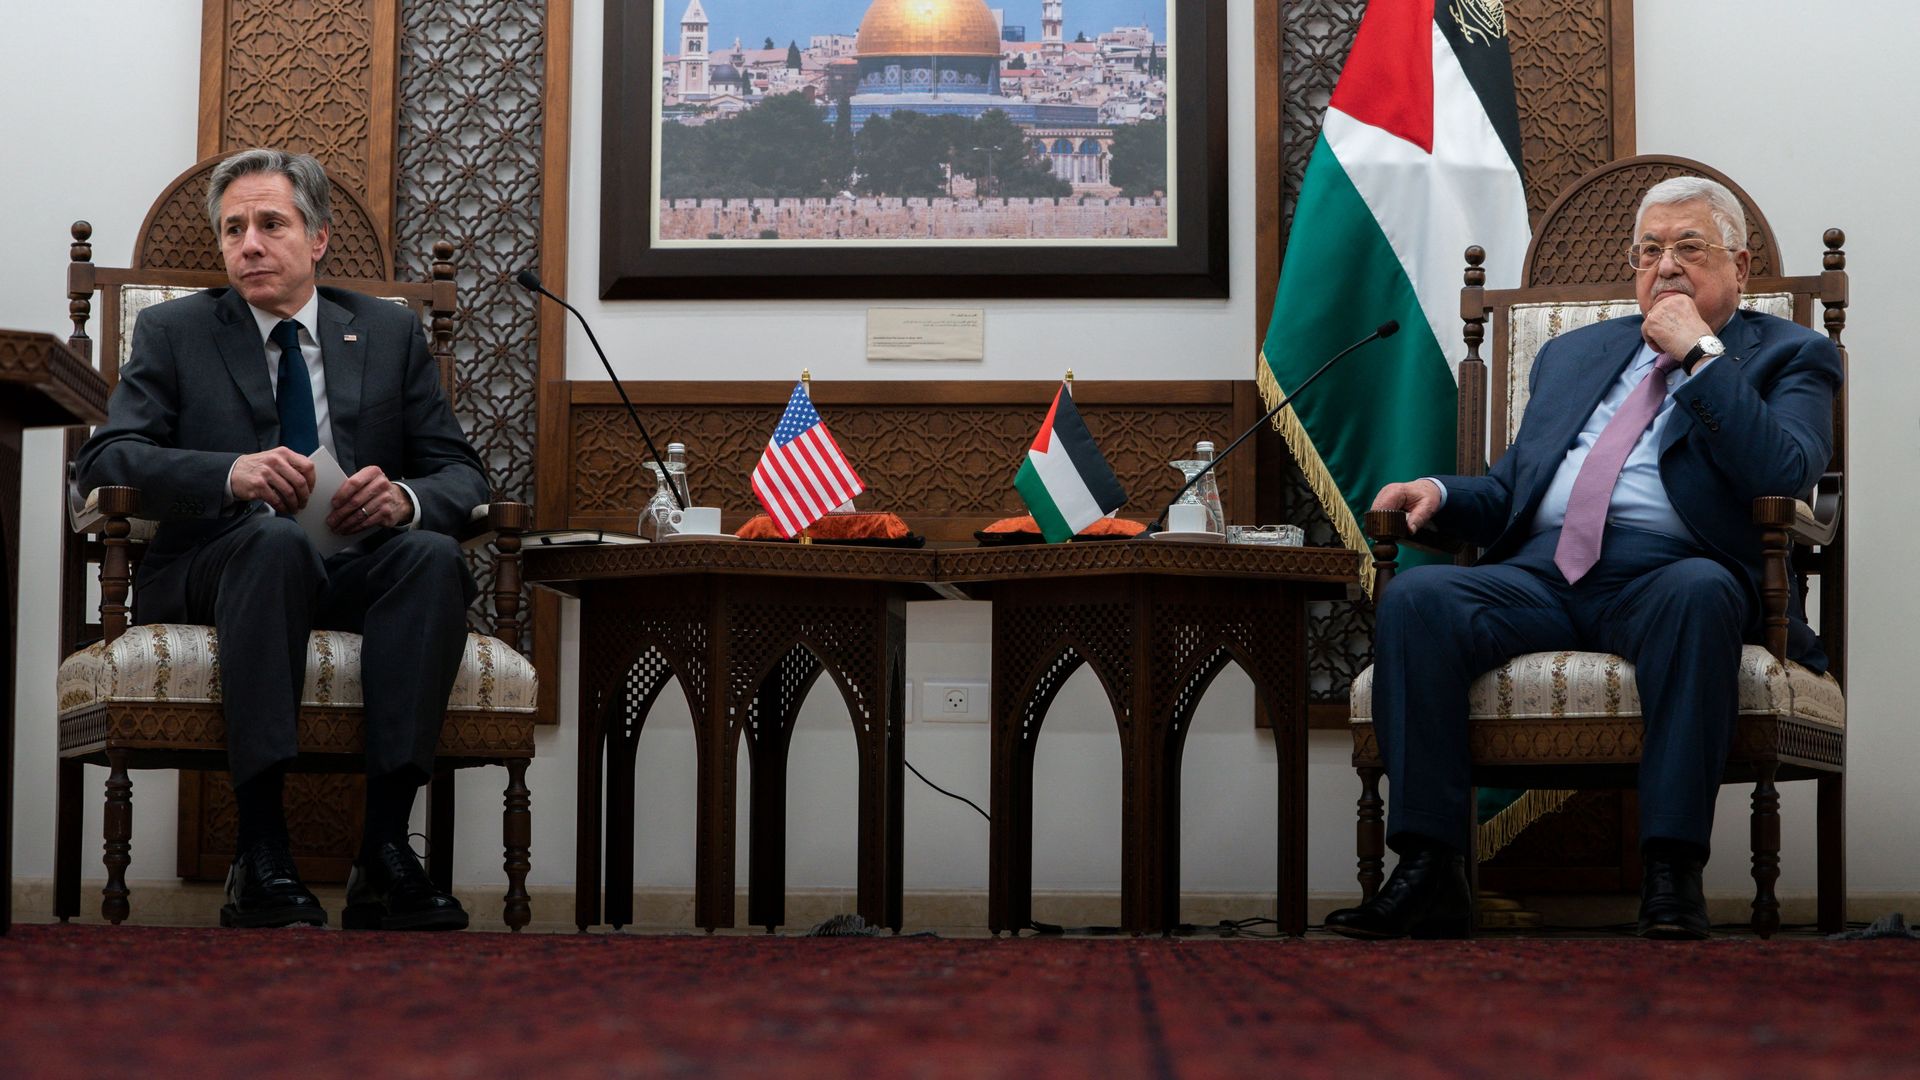 US Secretary of State Antony Blinken, left, meets with Palestinian leader Mahmoud Abbas, on March 27, 2022, in the West Bank city of Ramallah.